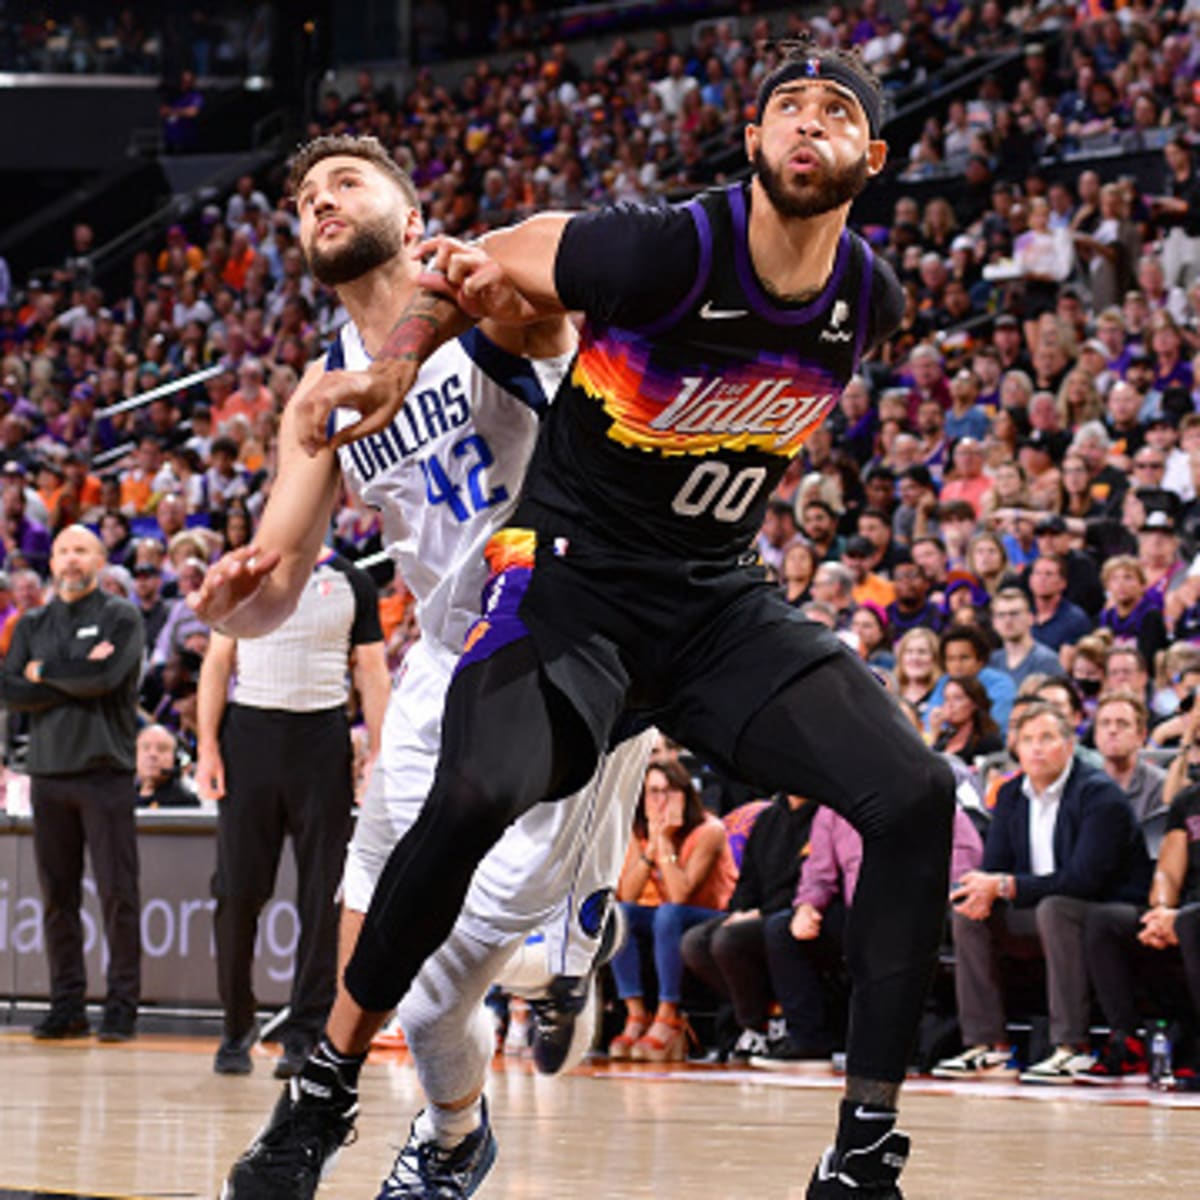 Free-agent center JaVale McGee agrees to deal with Mavericks